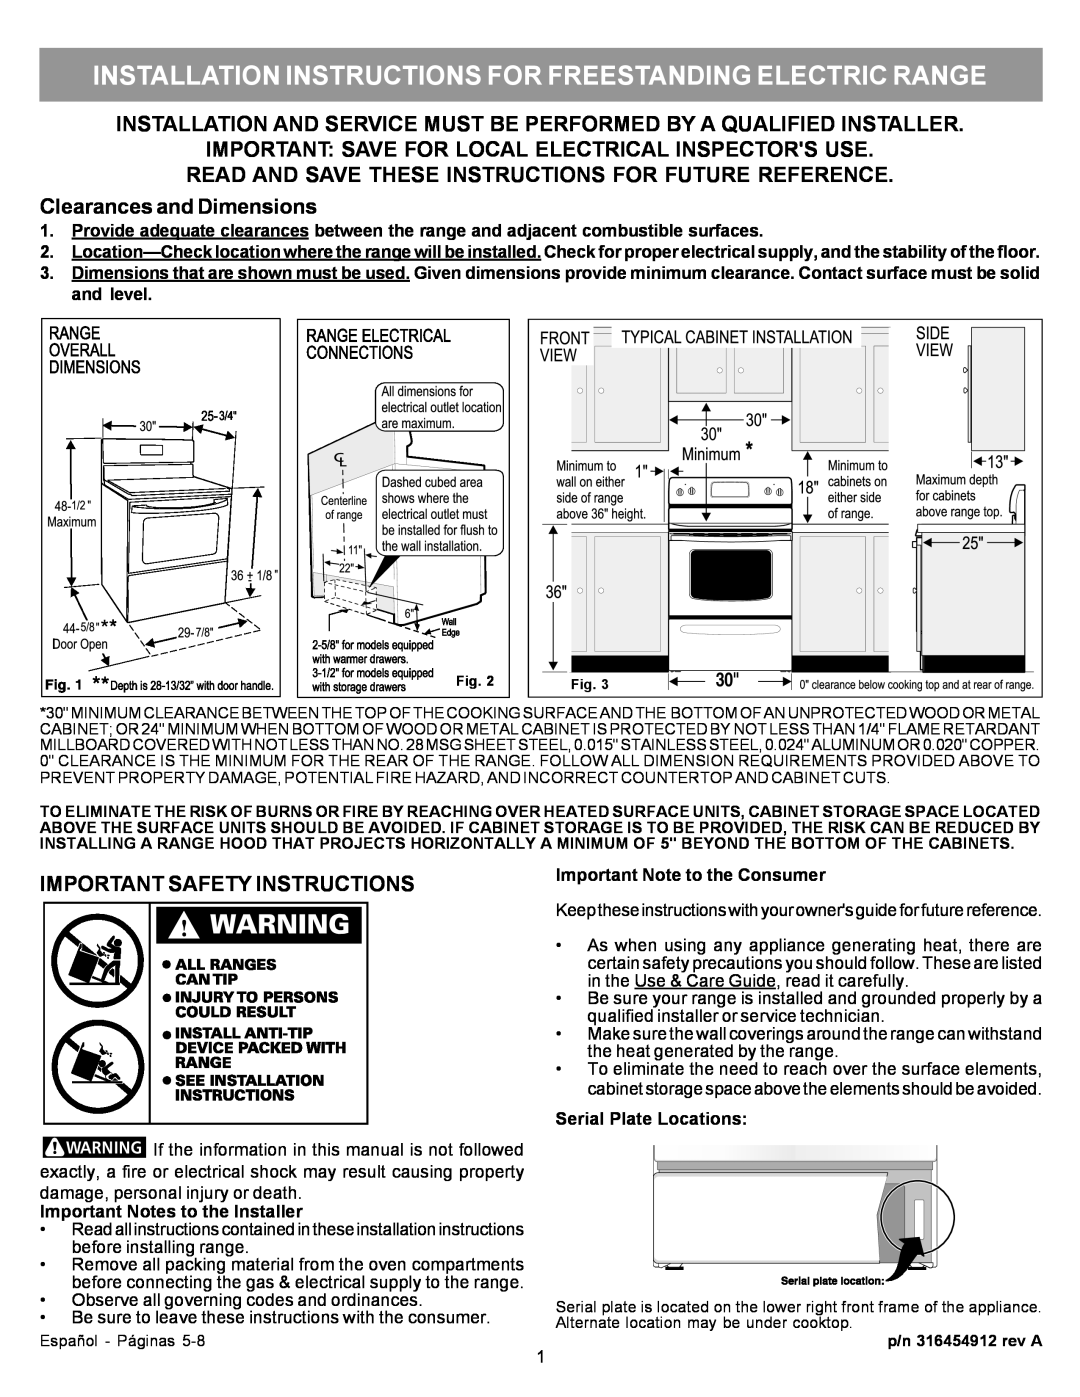 Frigidaire 316454912 manual Installation Instructions For Freestanding Electric Range, Important Notes to the Installer 